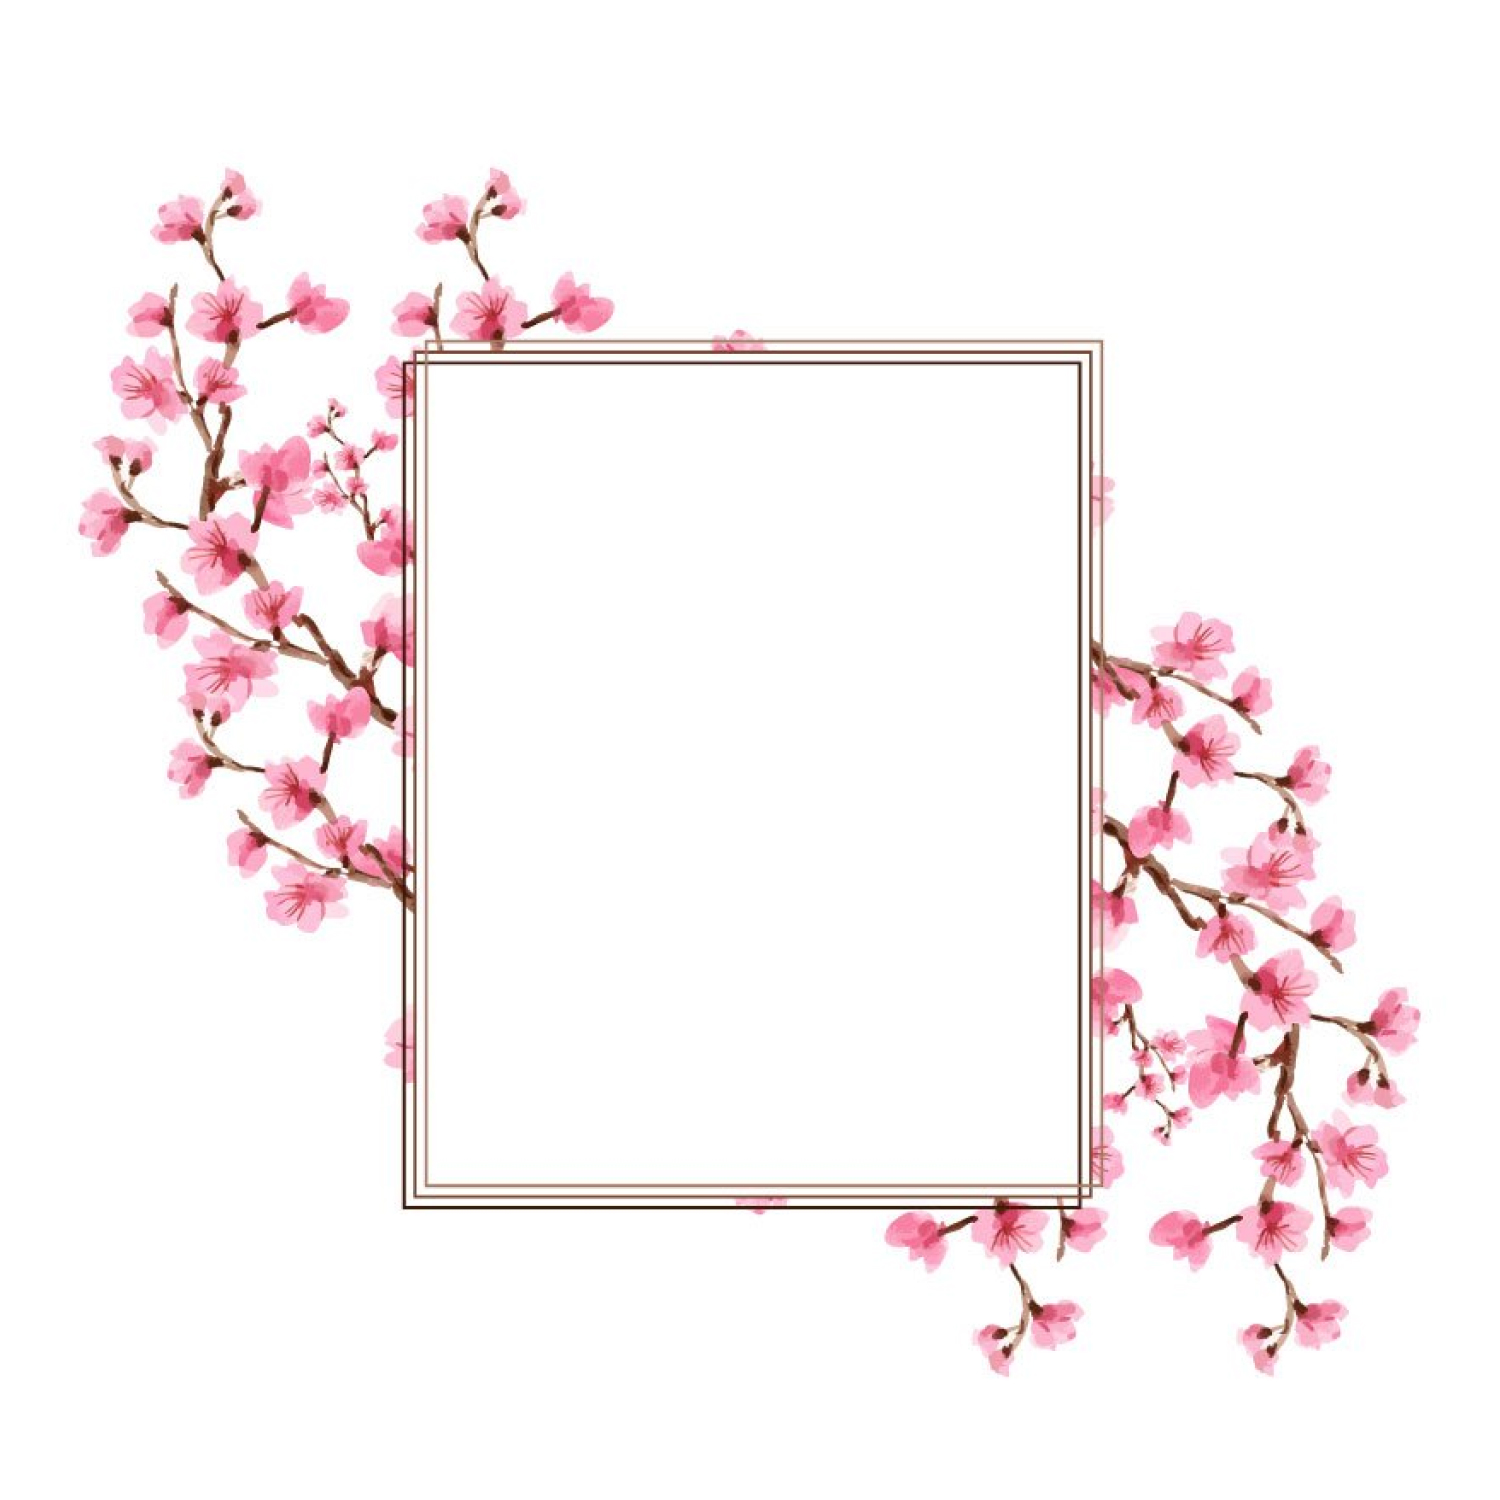 Spring Floral Photo Frame Vector cover.